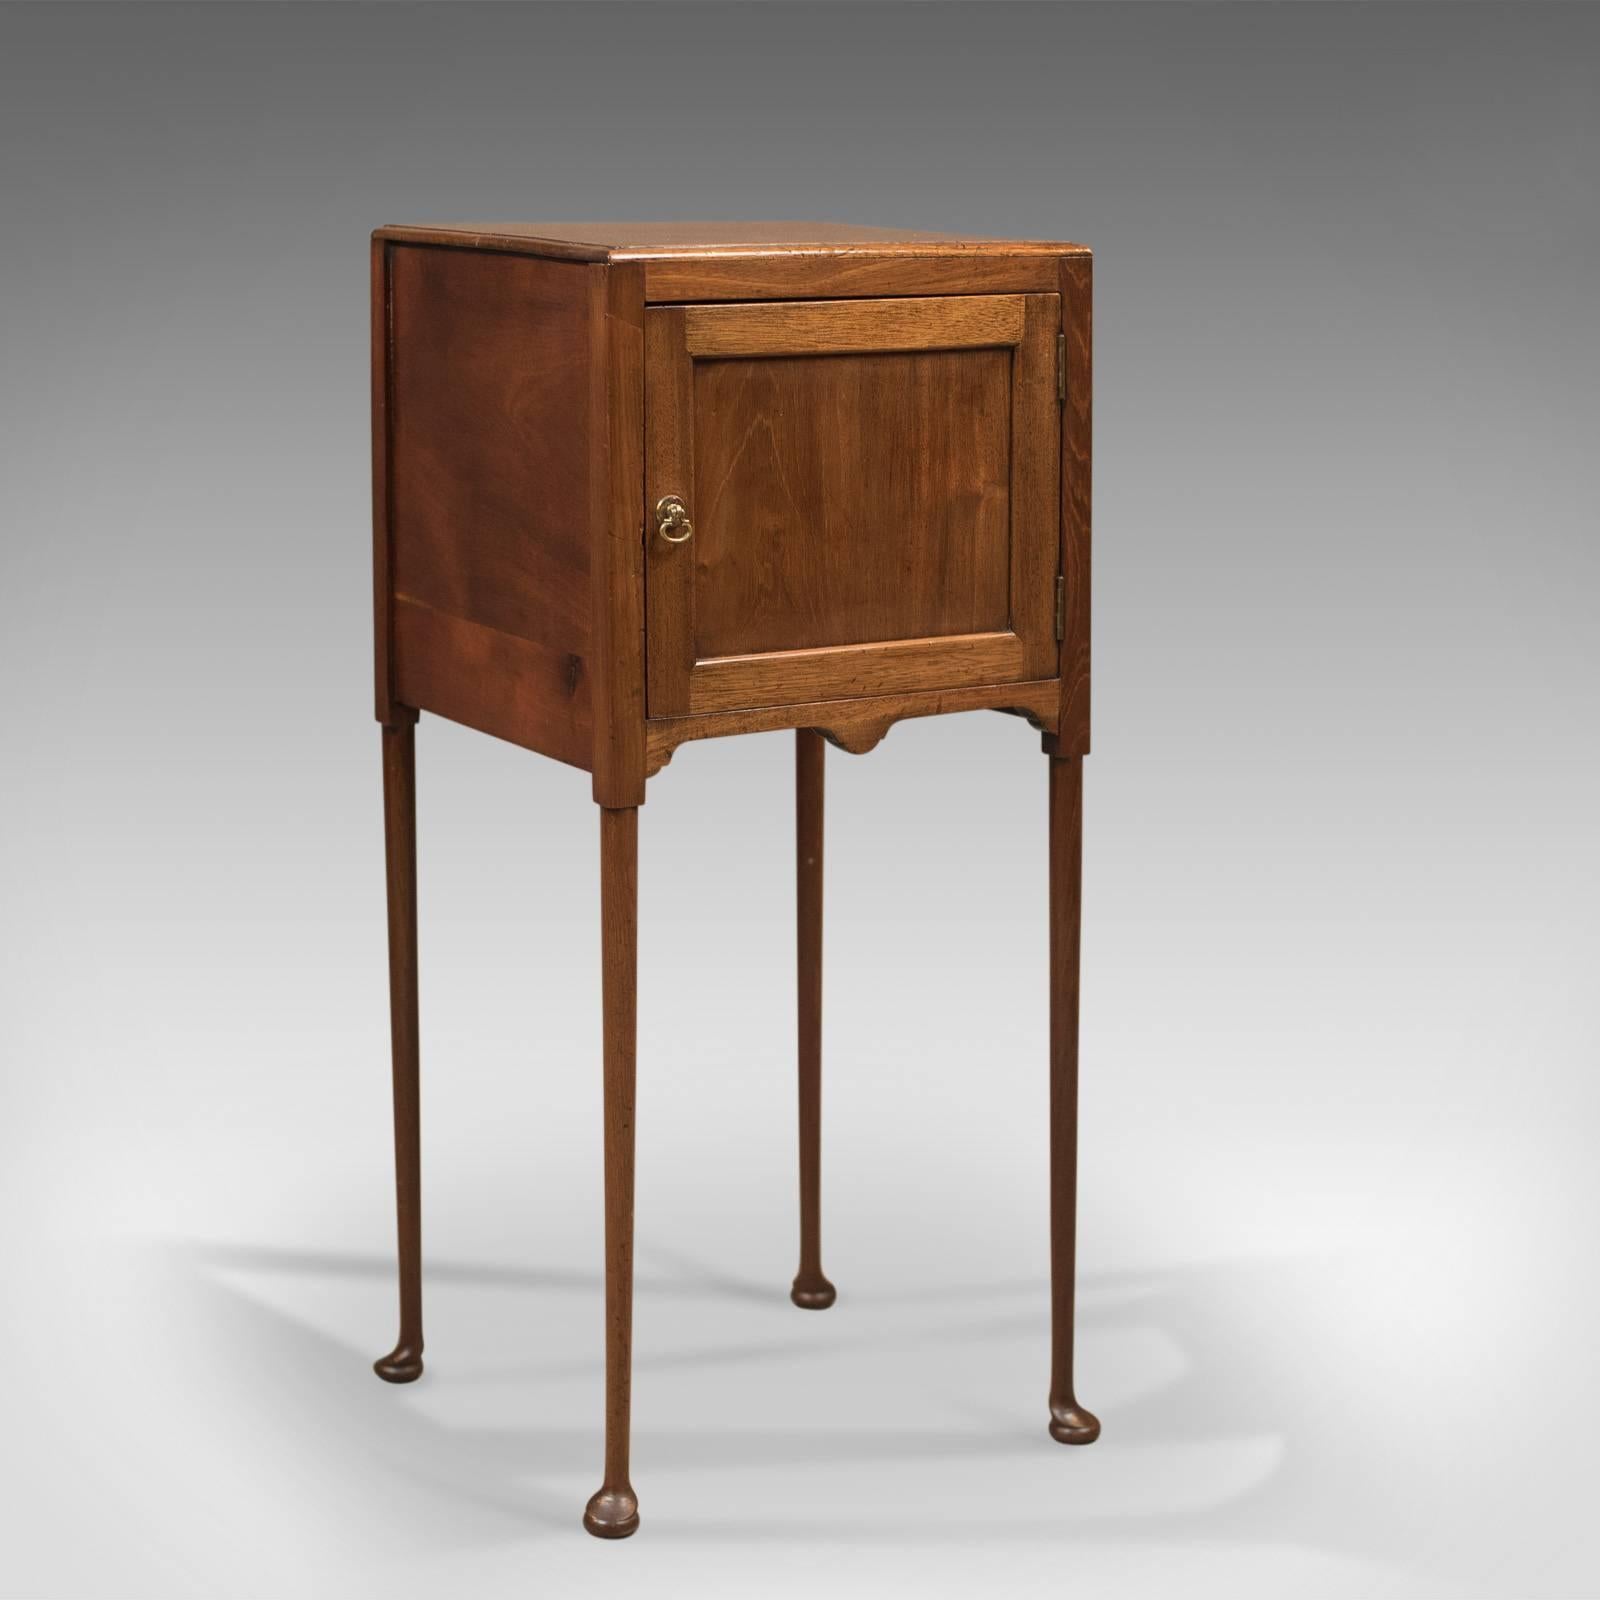 This is a beautifully proportioned antique bedside cabinet dating to the late Georgian period, circa 1780.

Crafted in a quality mahogany with good grain detail
Raised on slender tapering legs
Standing upon pad feet
Shaped apron beneath